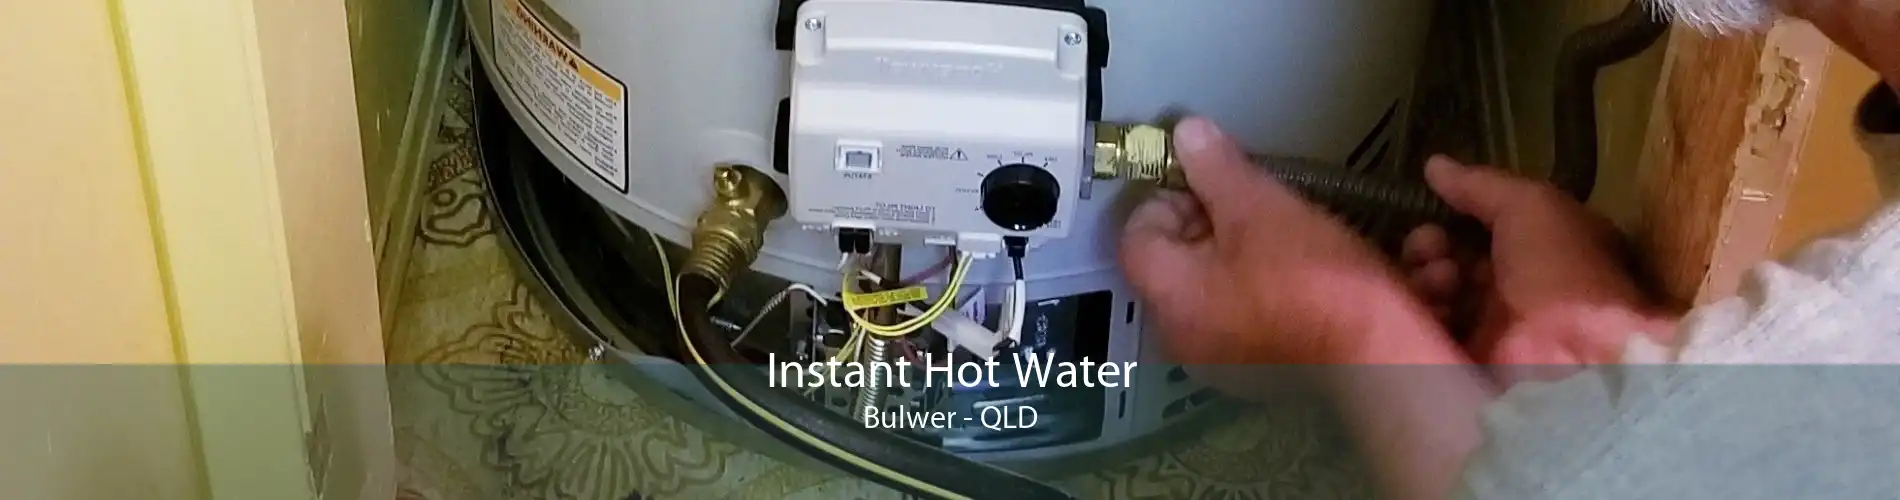 Instant Hot Water Bulwer - QLD